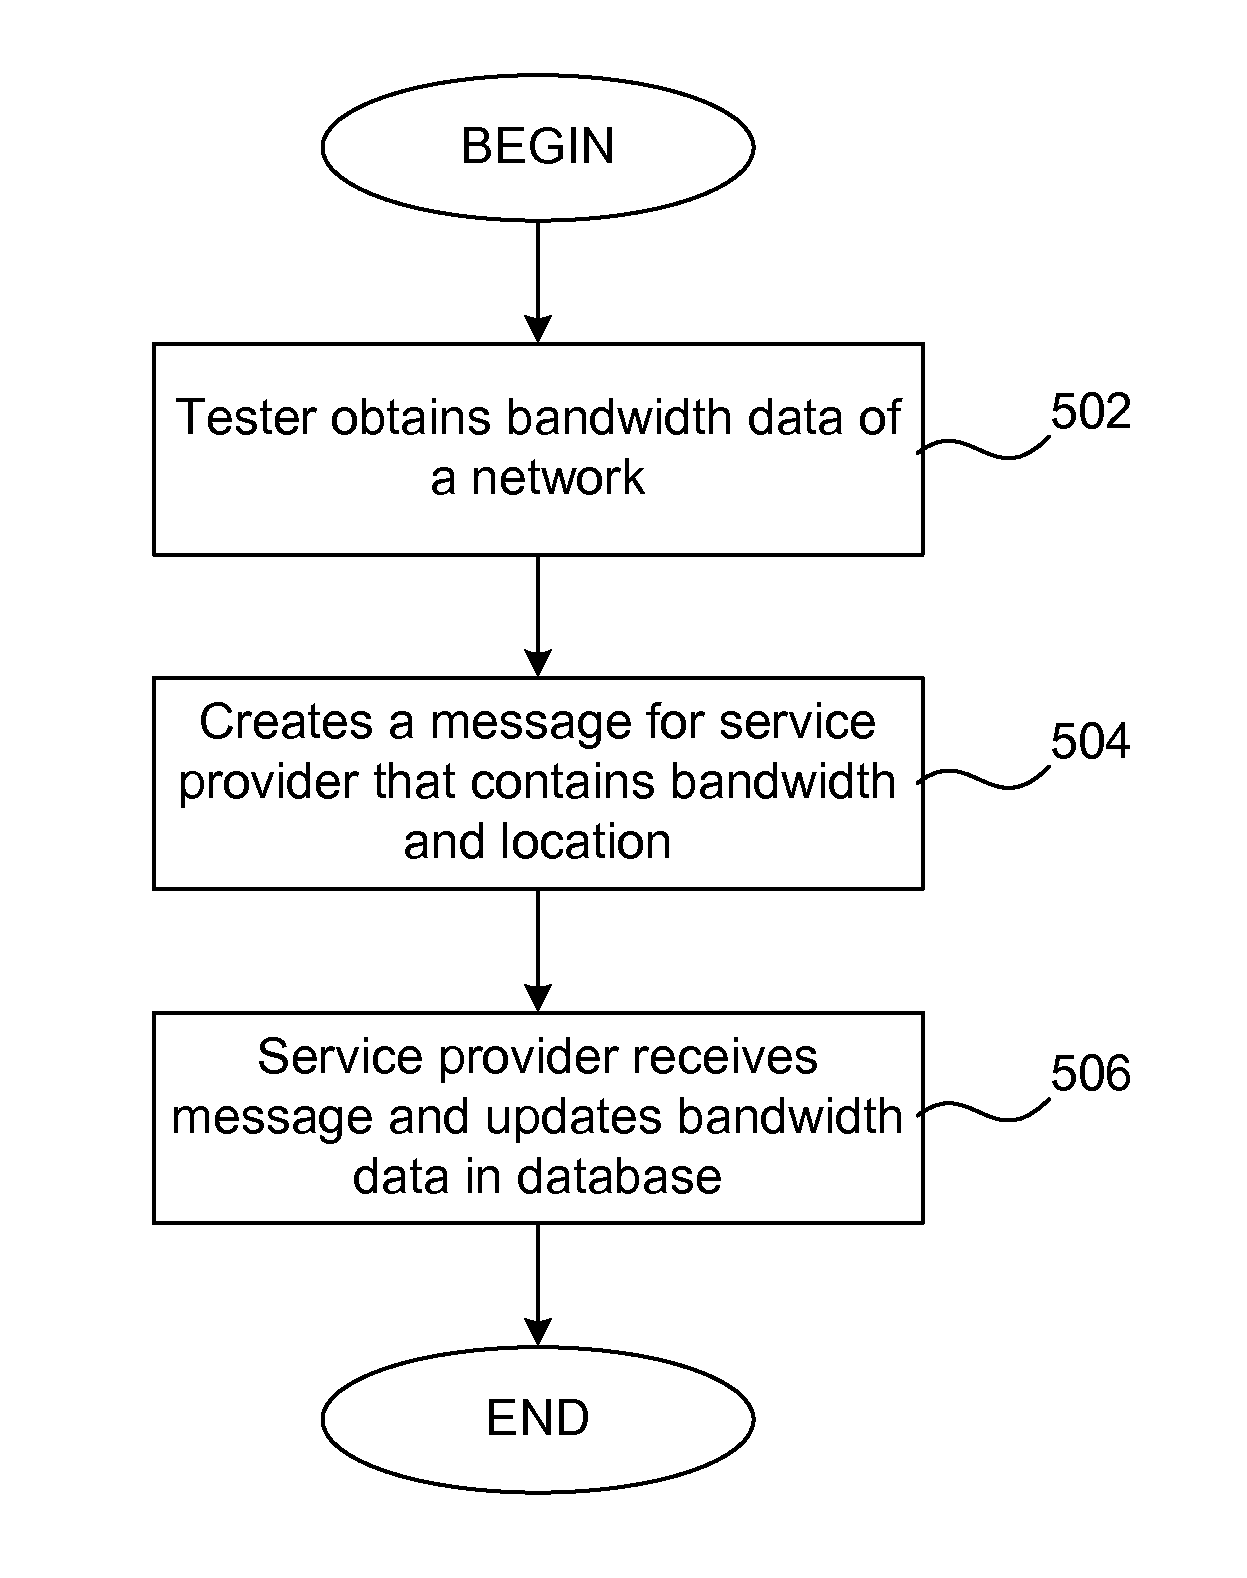 Agent-based bandwith monitoring for predictive network selection